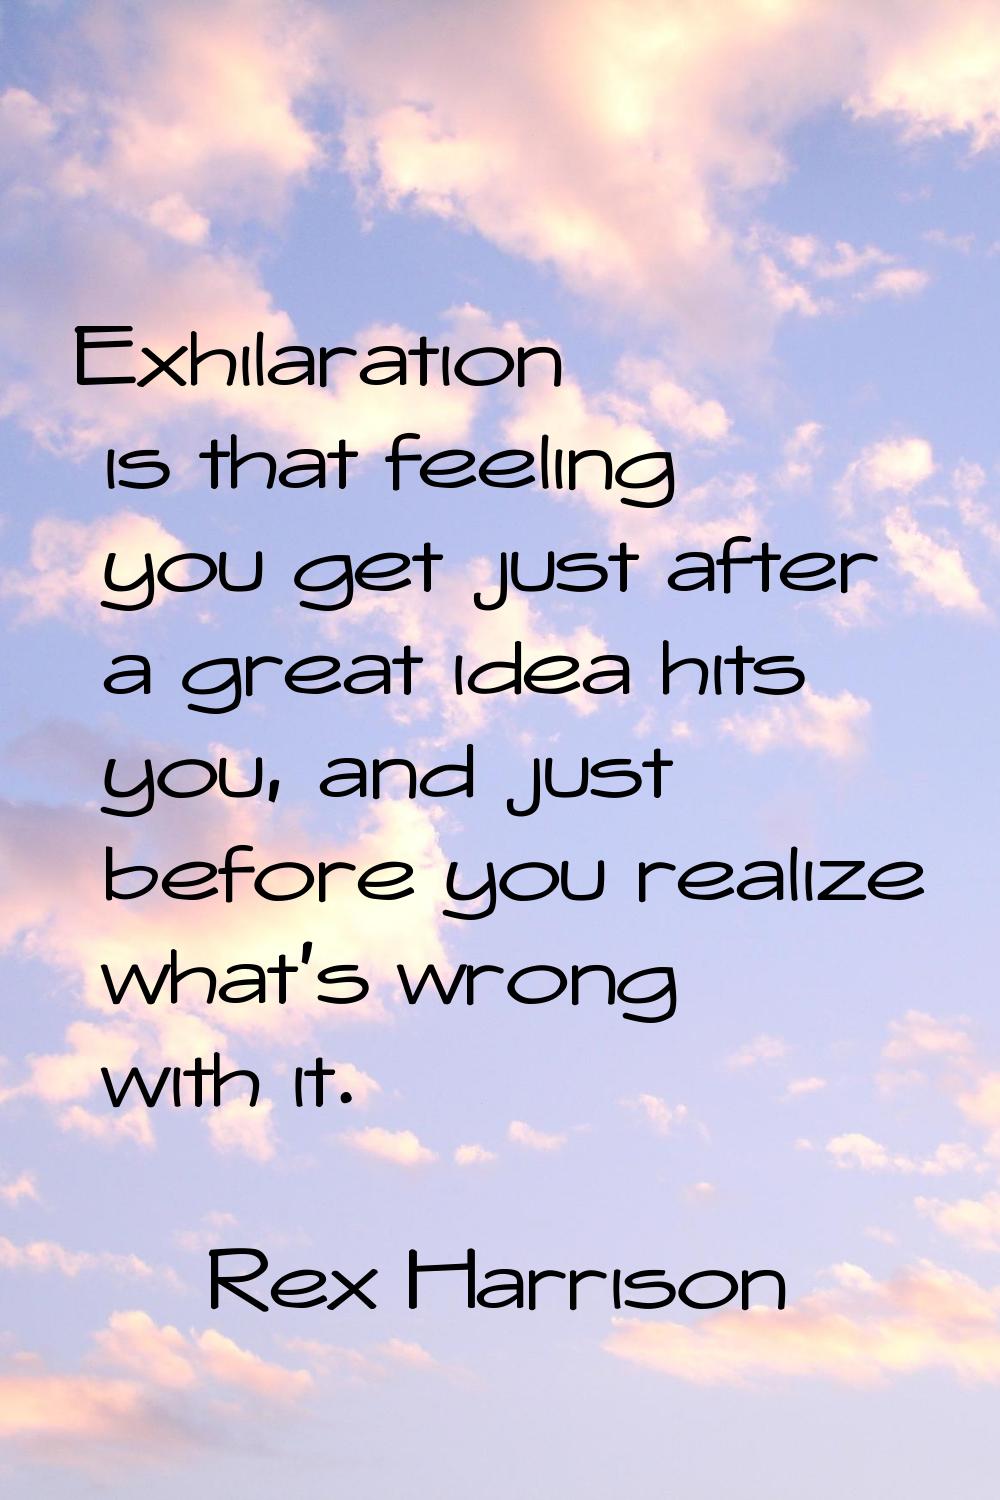 Exhilaration is that feeling you get just after a great idea hits you, and just before you realize 